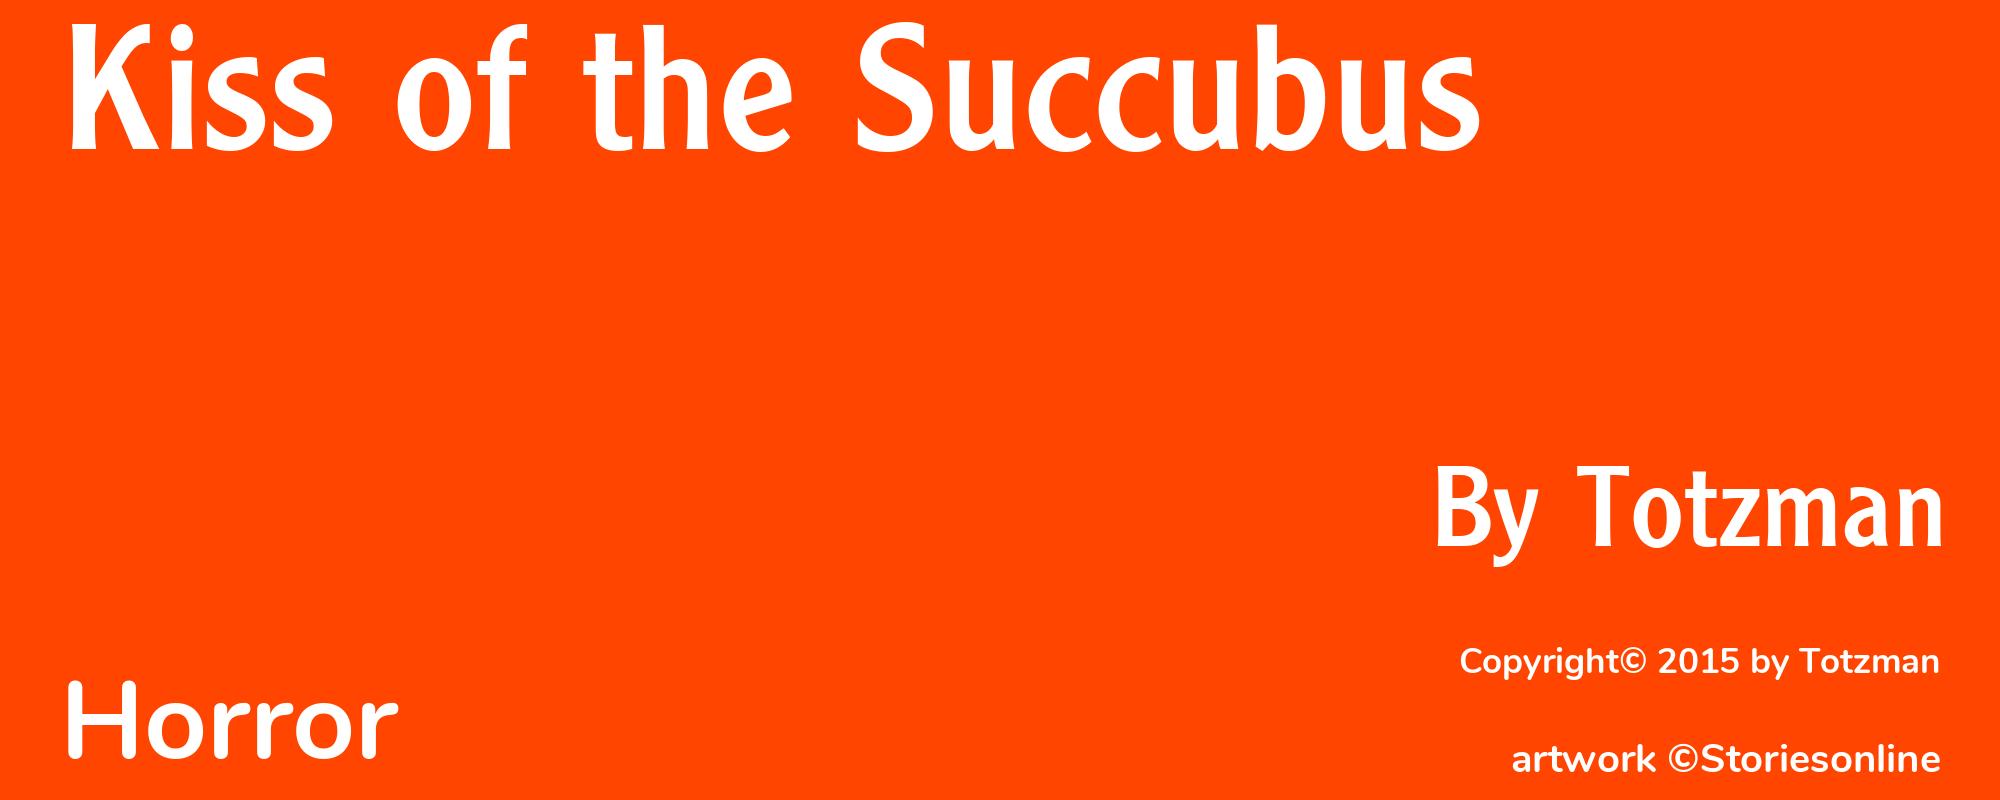 Kiss of the Succubus - Cover